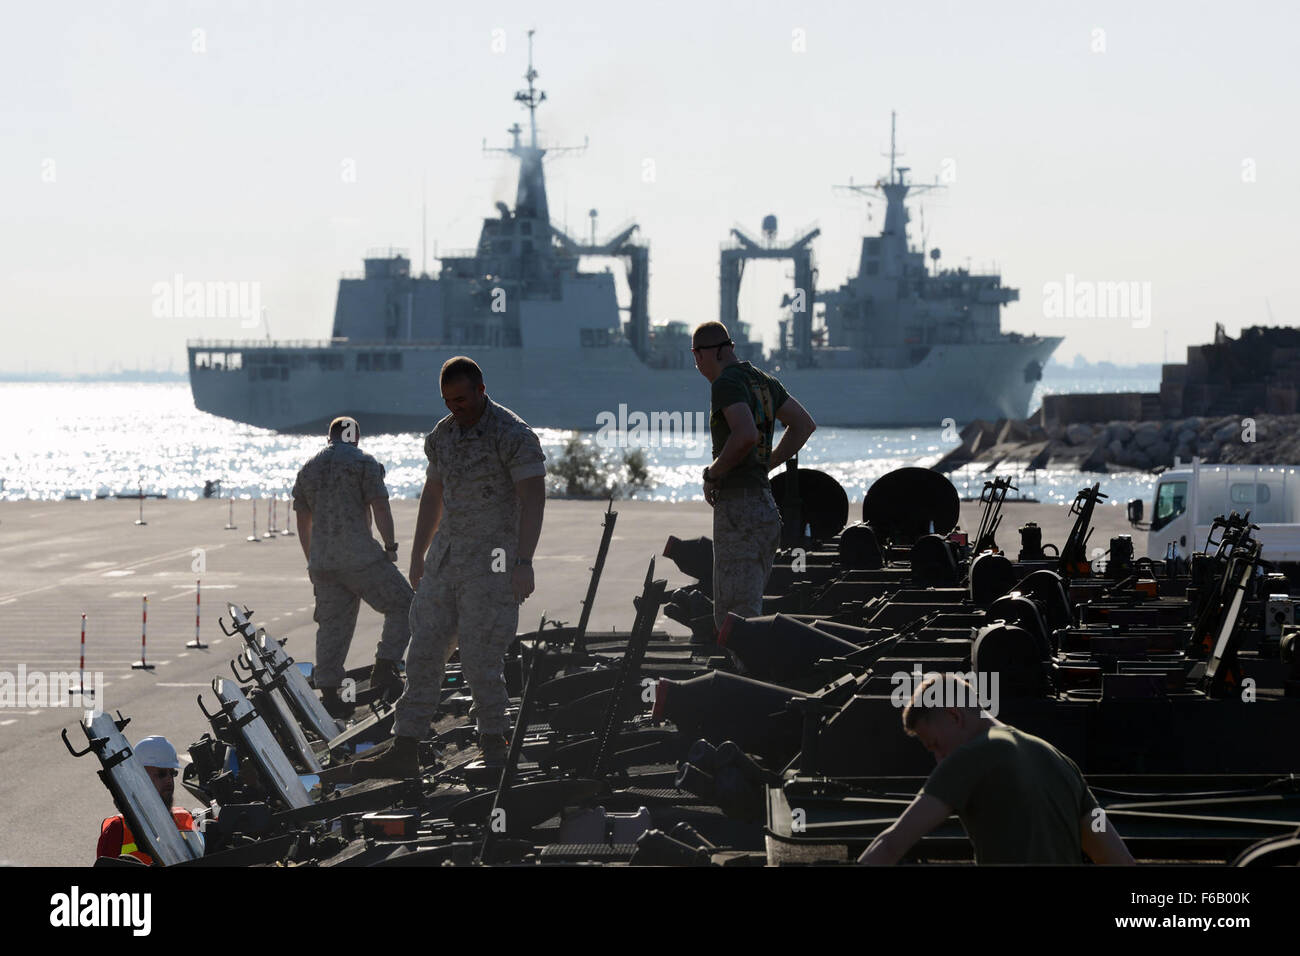 U.S. Marines inspect vehicles on the pier aside the USNS Sgt. William R. Button during a Maritime Prepositioning Force (MPF) as they prepare for NATO-led Exercise Trident Juncture 2015. More than 30 nations and 36,000 service members are participating in the event, Rota, Spain, Oct. 21, 2015. (U.S. Army photo by Visual Information Specialist Jason Johnston/Released) Stock Photo